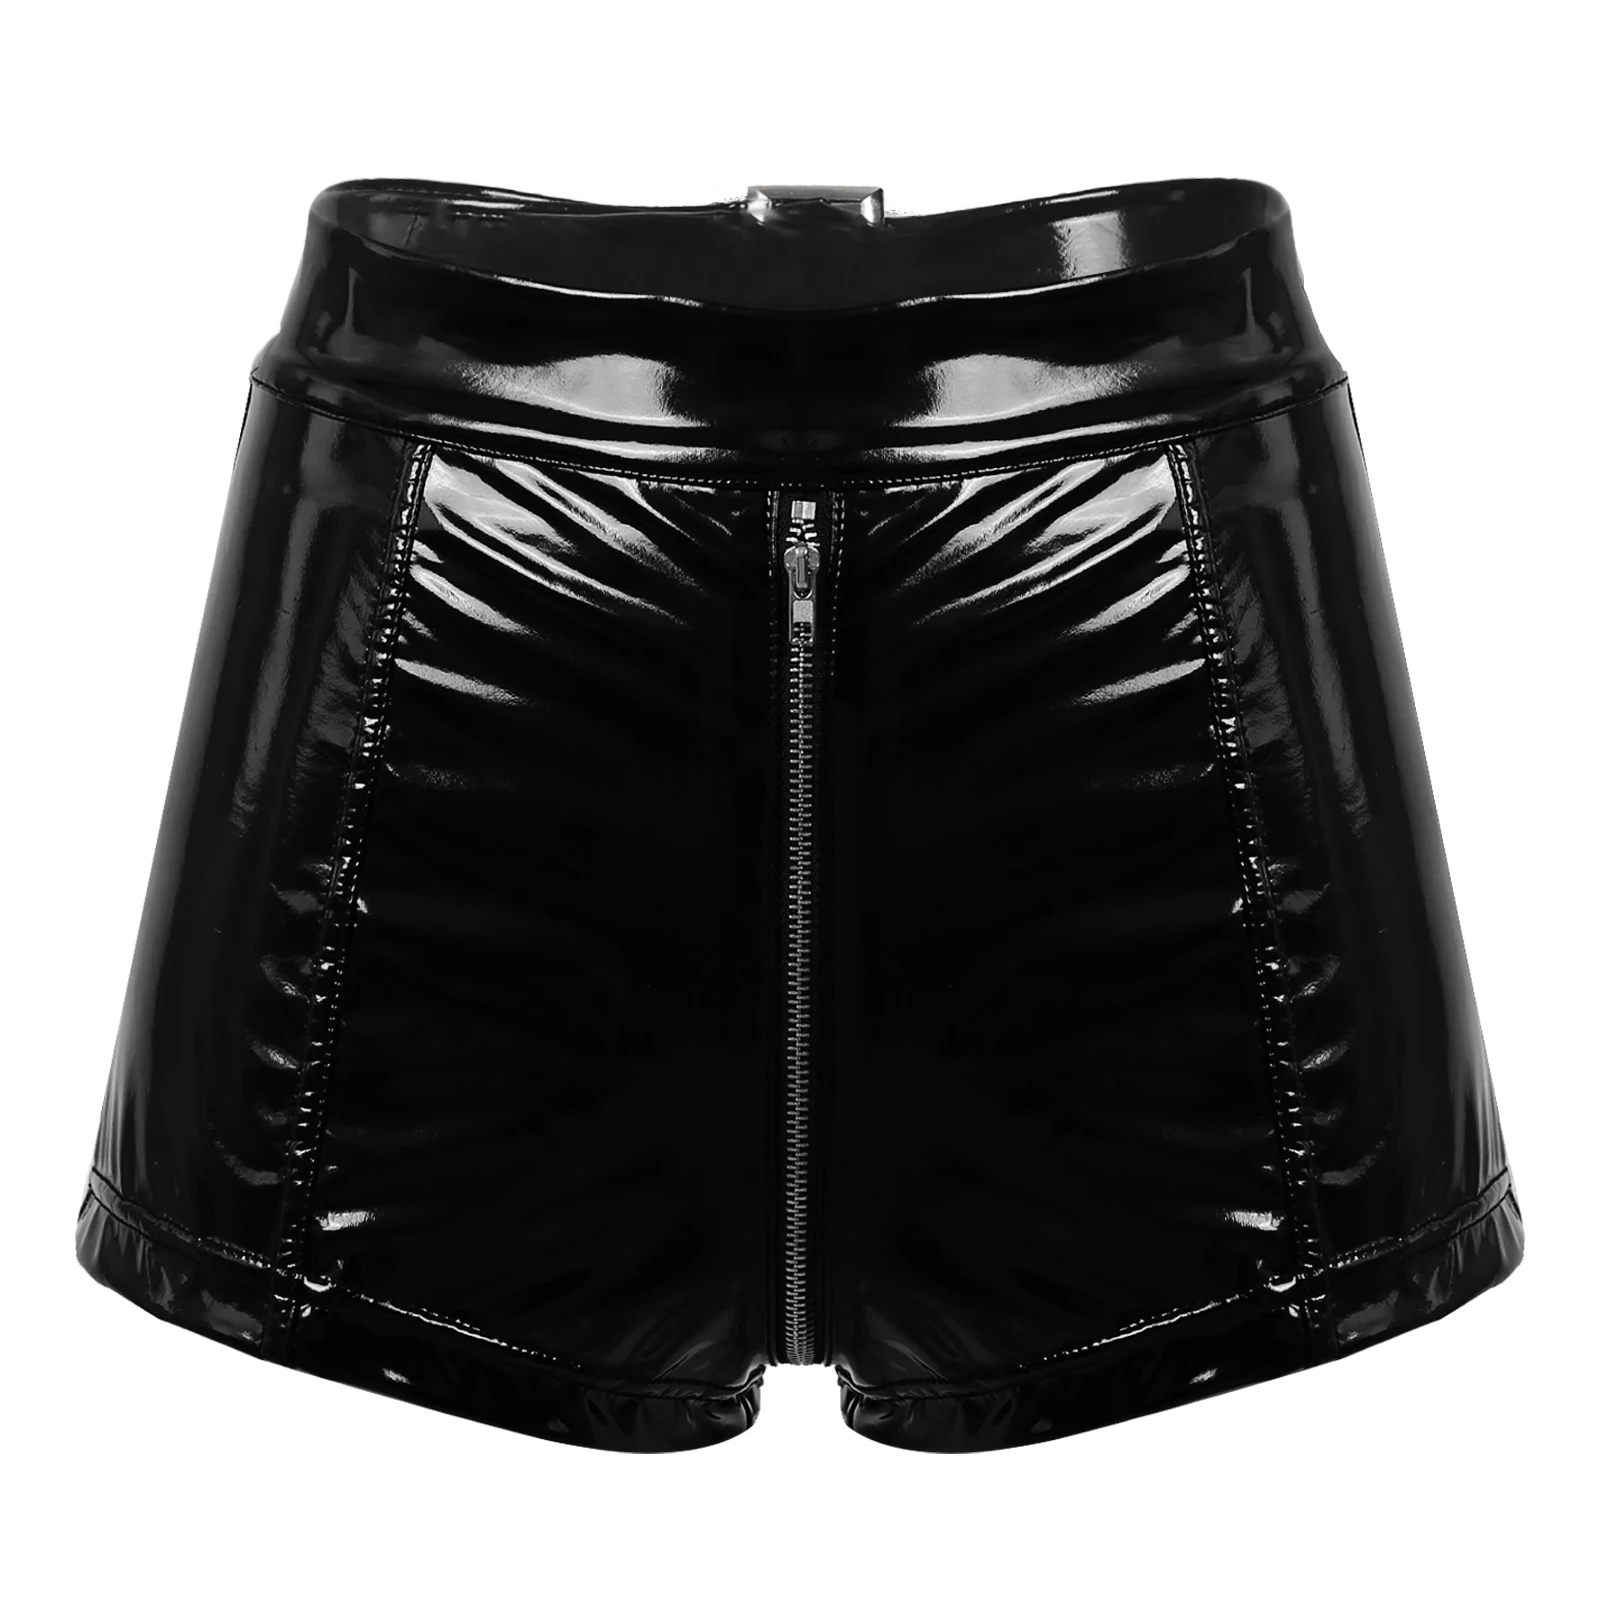 Womens Wet Look Patent Leather Hot Pants Pole Dance Rave Costumes ...